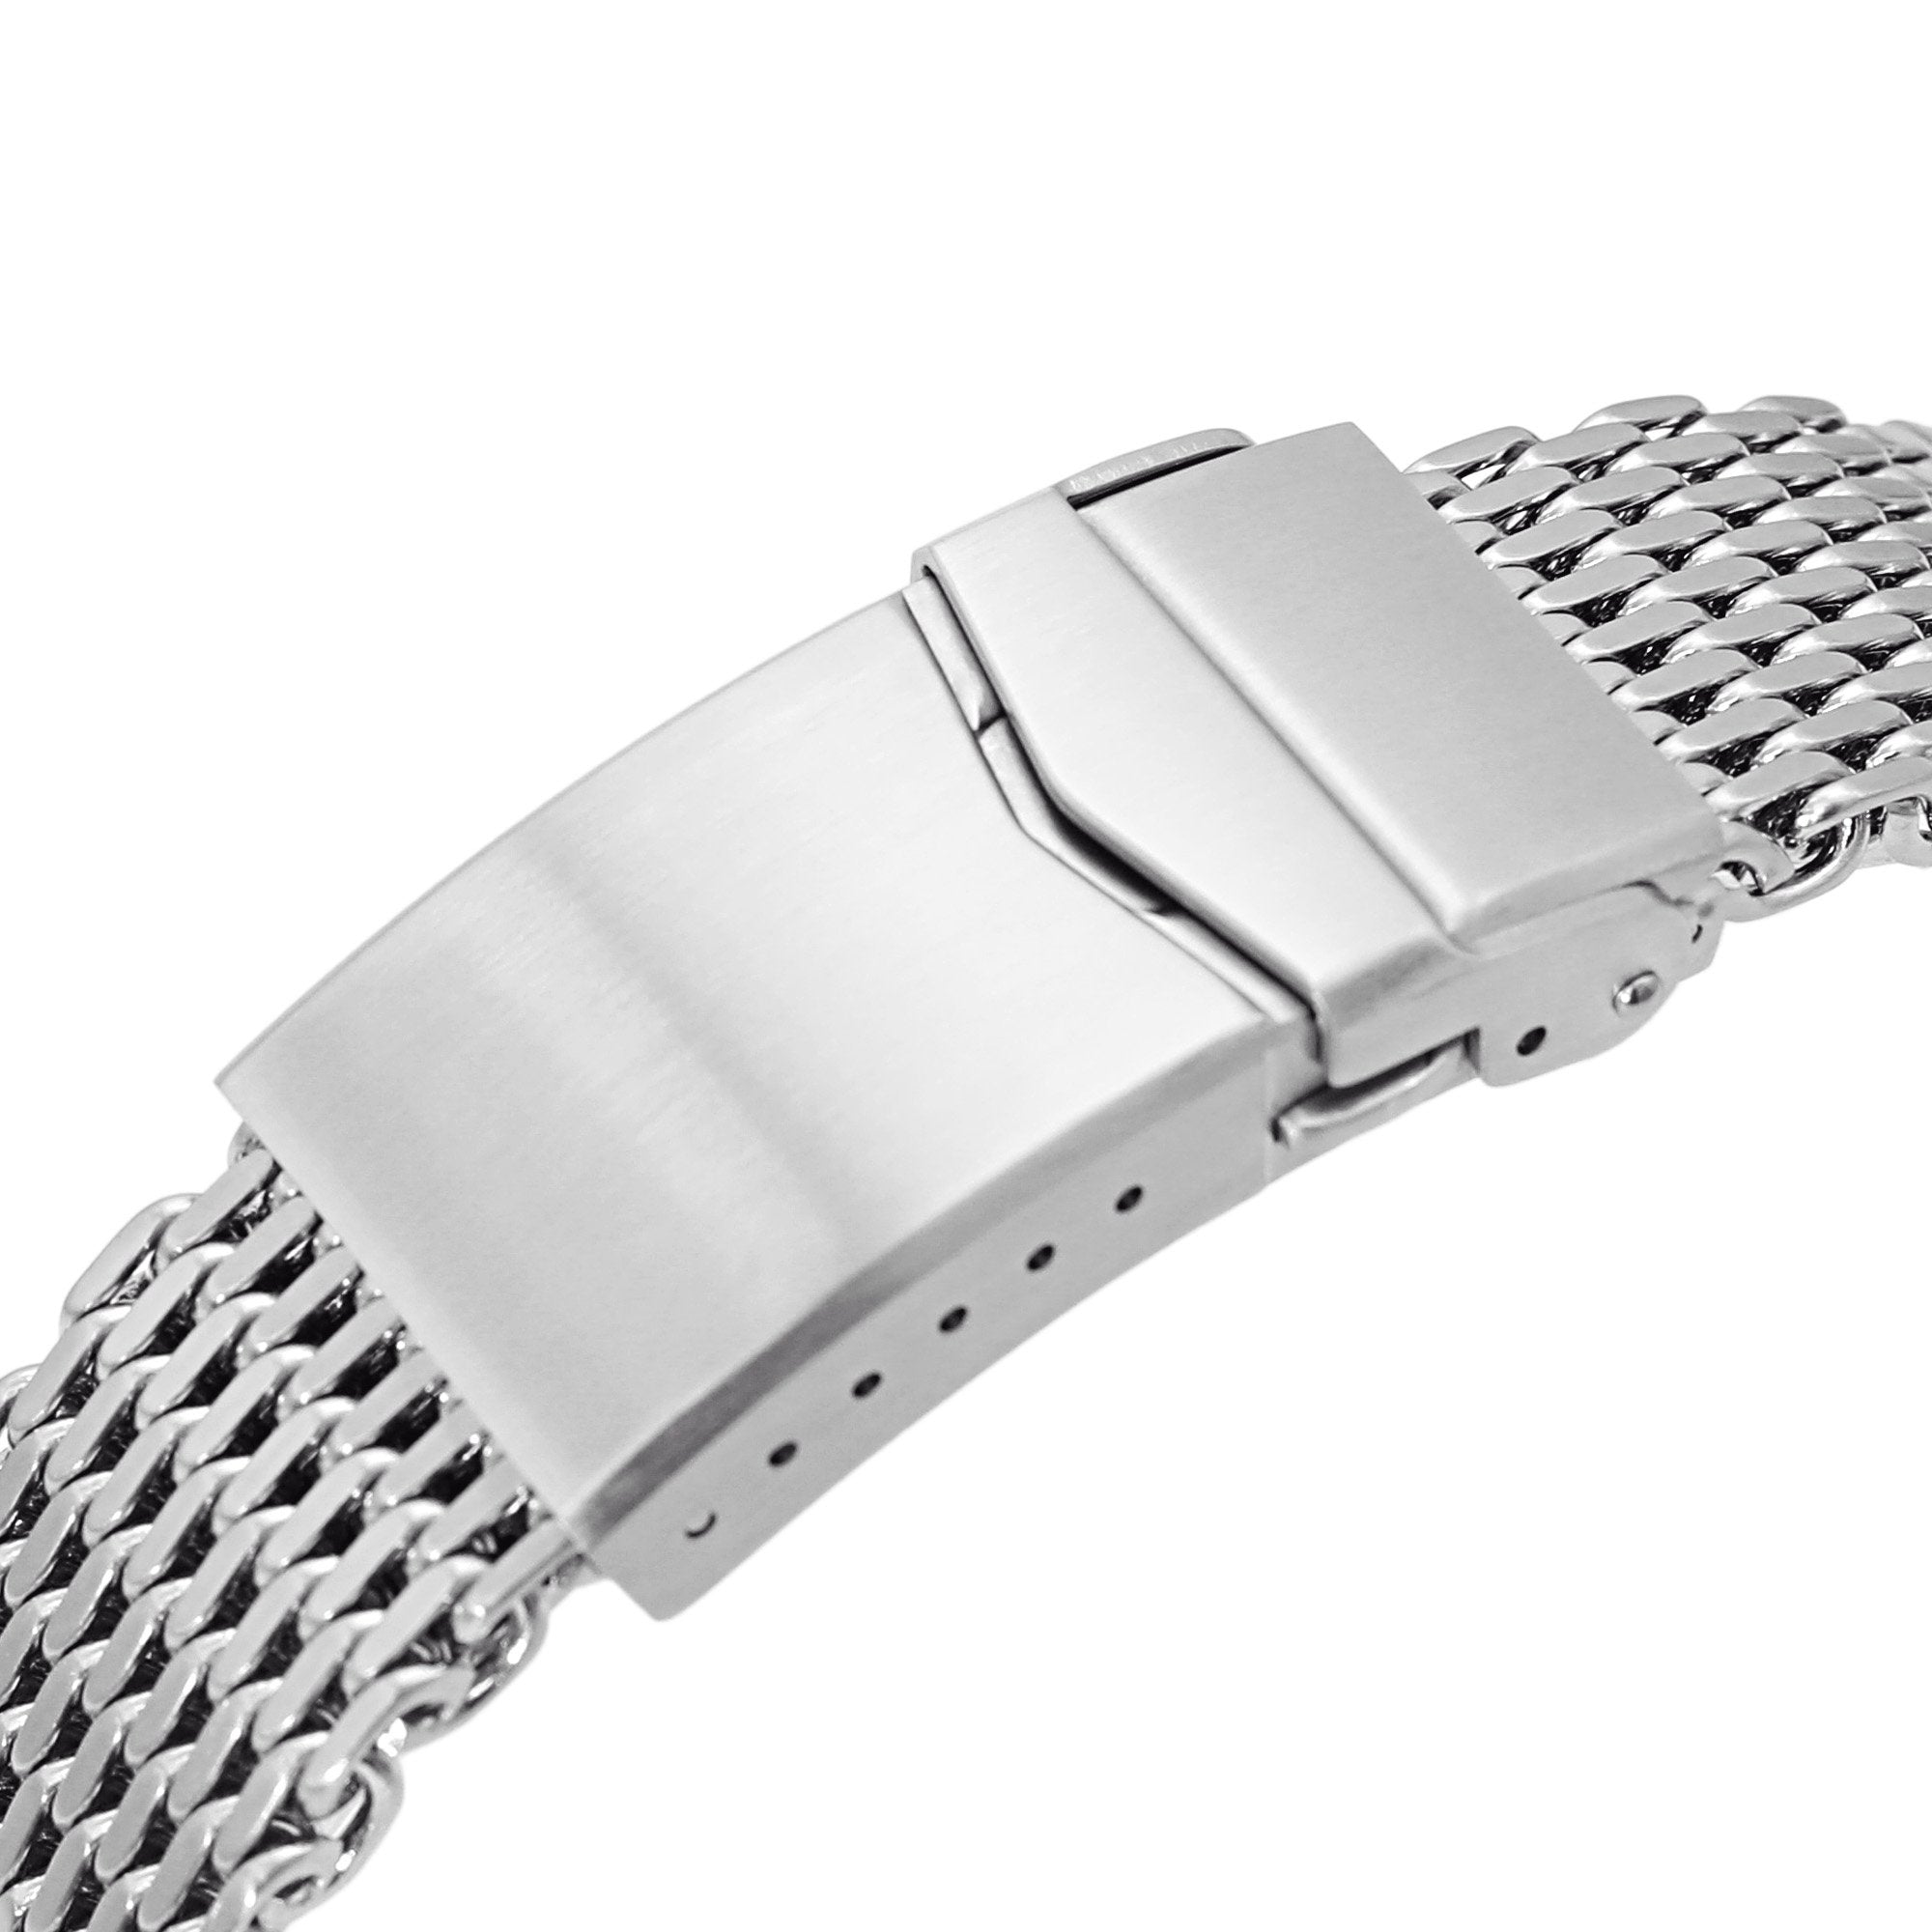 22mm Tapered "SHARK" Mesh Band Stainless Steel Watch Bracelet V-Clasp Brushed Strapcode Watch Bands